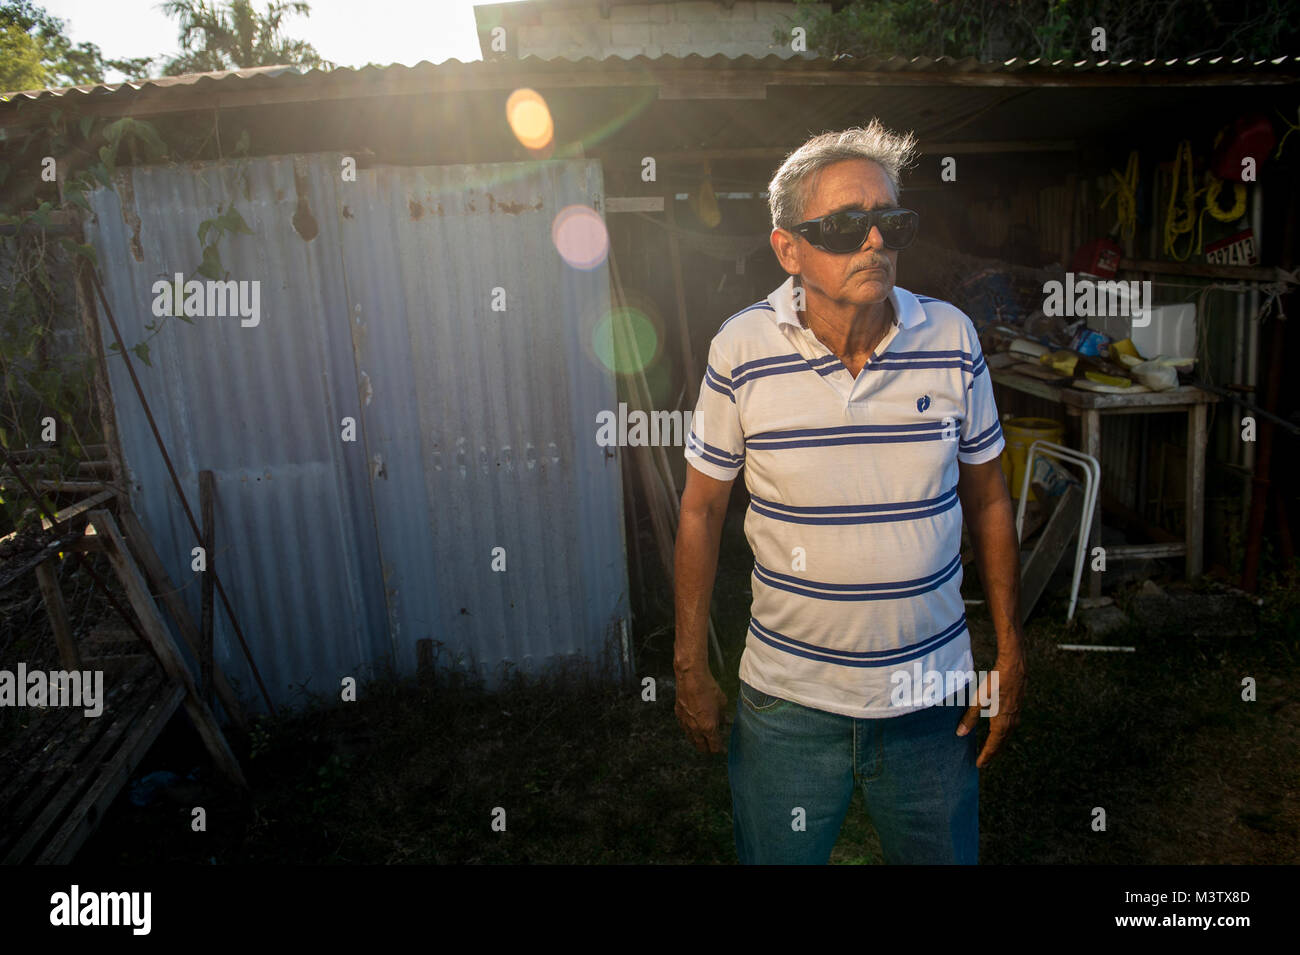 Eduardo Barrera stands in front of his work shed, Feb. 7, 2017, after having an extracapsular cataract extraction with intraocular implant surgery the day before at the Centro Hospitalario Luis 'Chicho' Fabrega during a medical readiness training exercise in Santiago, Panama. A U.S. military medical team was in Panama to help treat individuals with cataracts that otherwise would have gone untreated. Medical readiness training exercises provide U.S. military personnel training in delivery of medical care in austere conditions, promote diplomatic relations between the U.S. and host nations in Ce Stock Photo